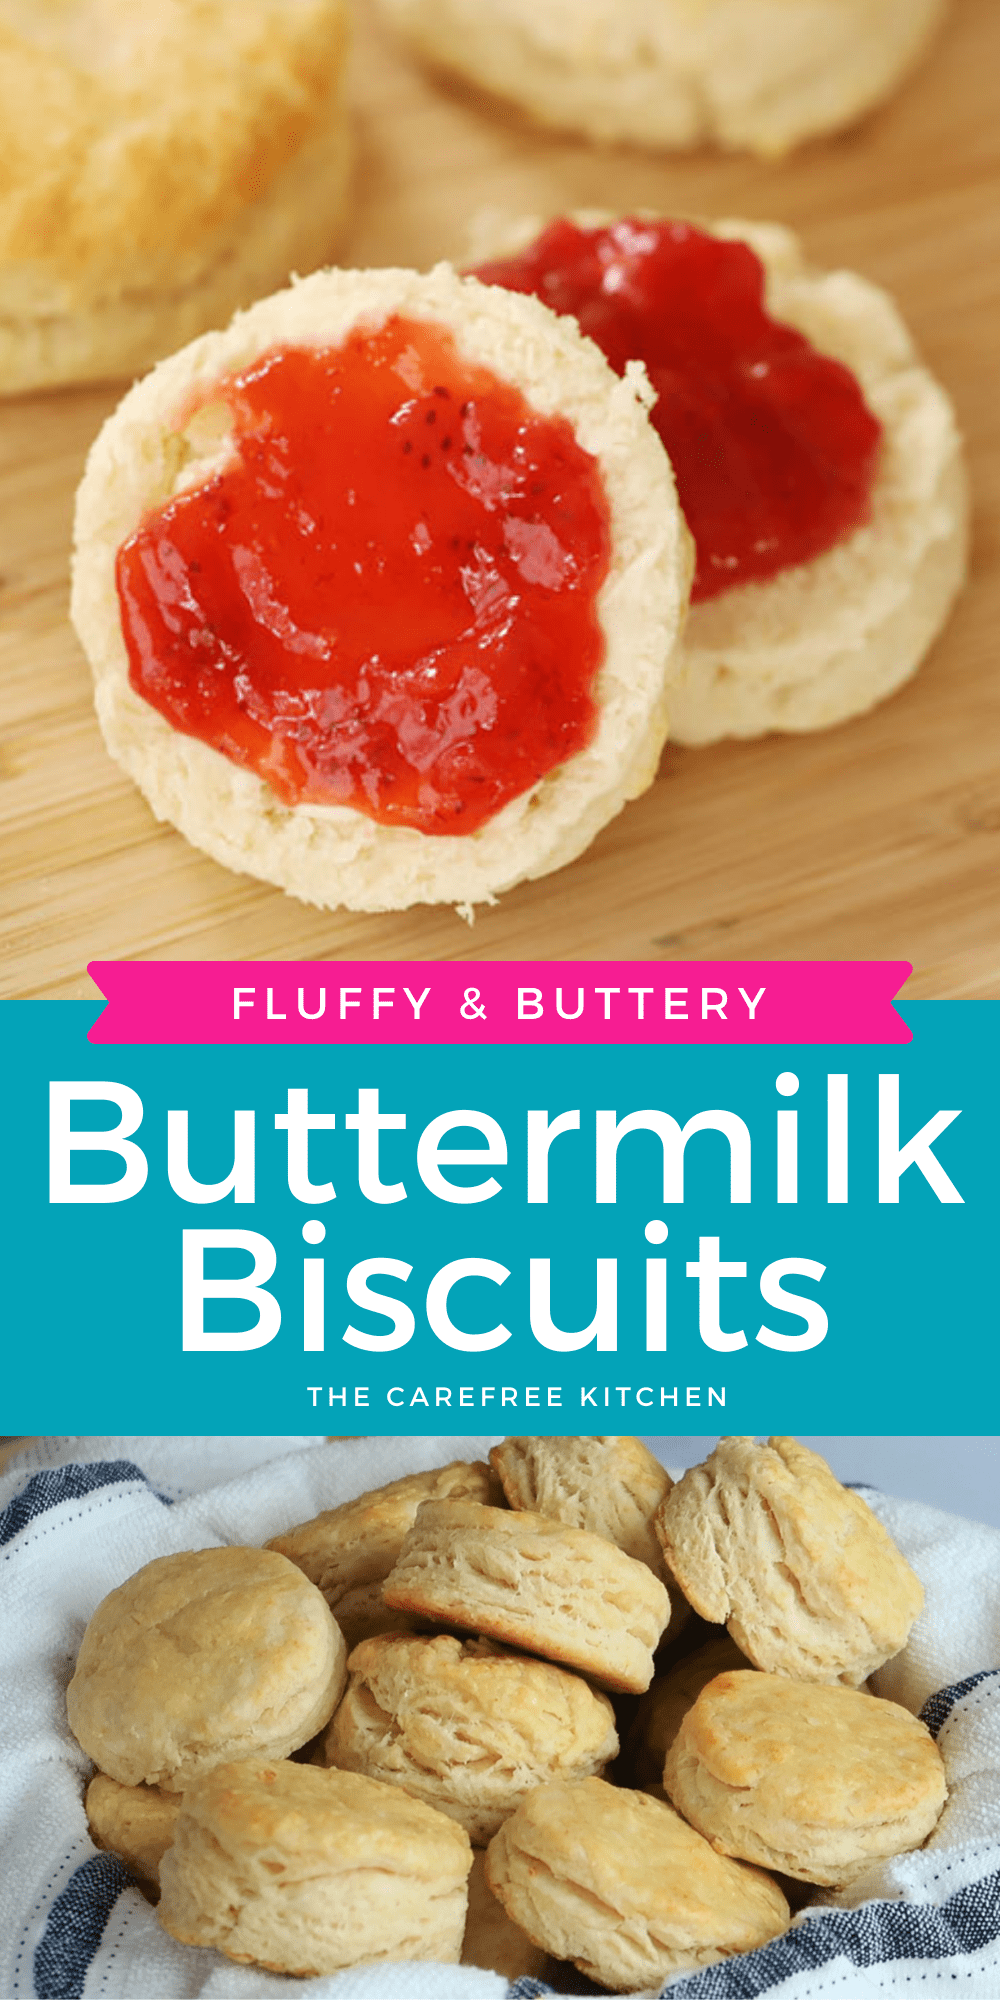 Homemade Flaky Biscuit Recipe Recipe - The Carefree Kitchen